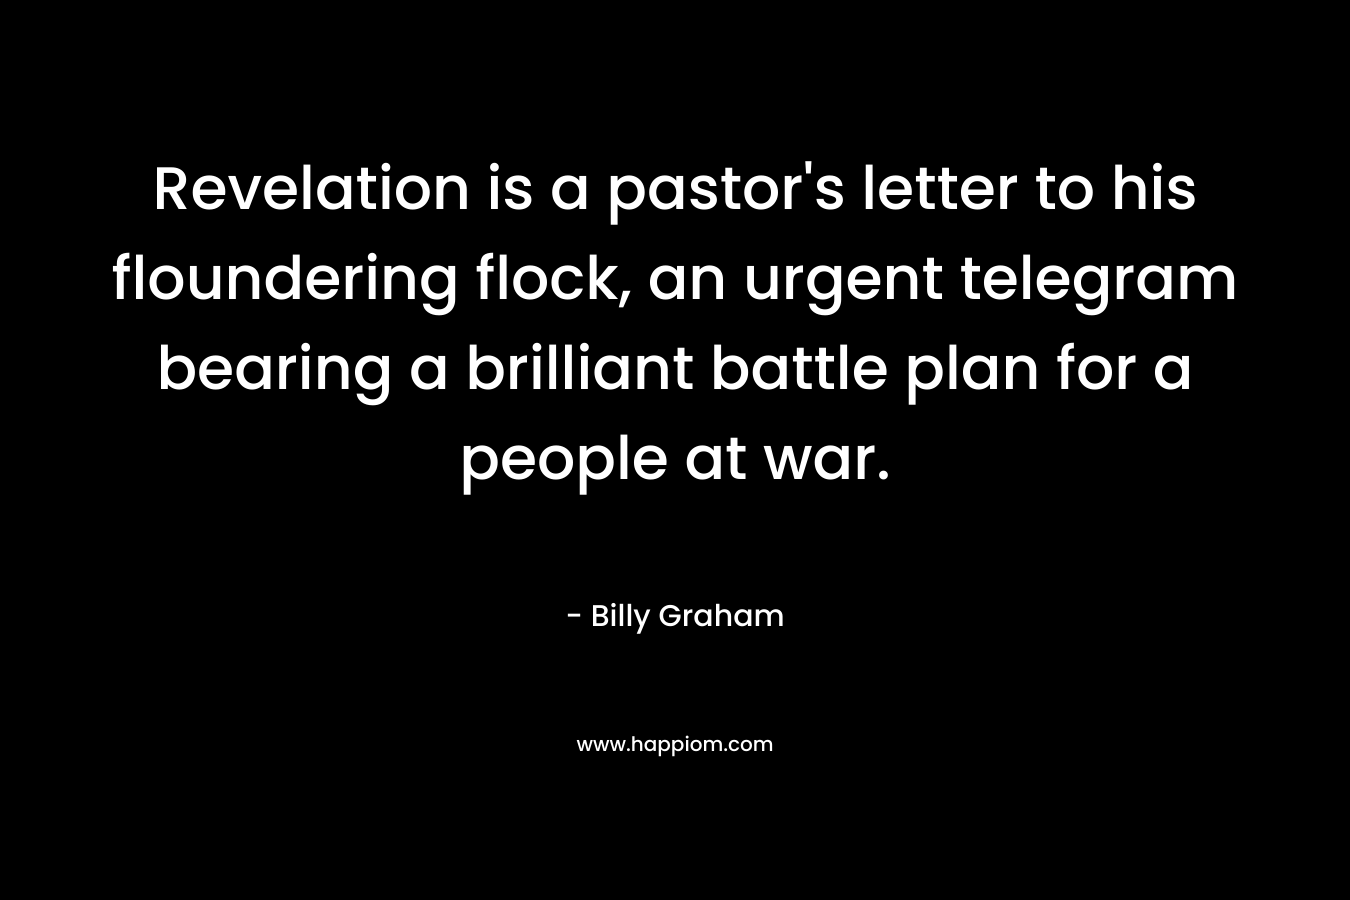 Revelation is a pastor’s letter to his floundering flock, an urgent telegram bearing a brilliant battle plan for a people at war. – Billy Graham